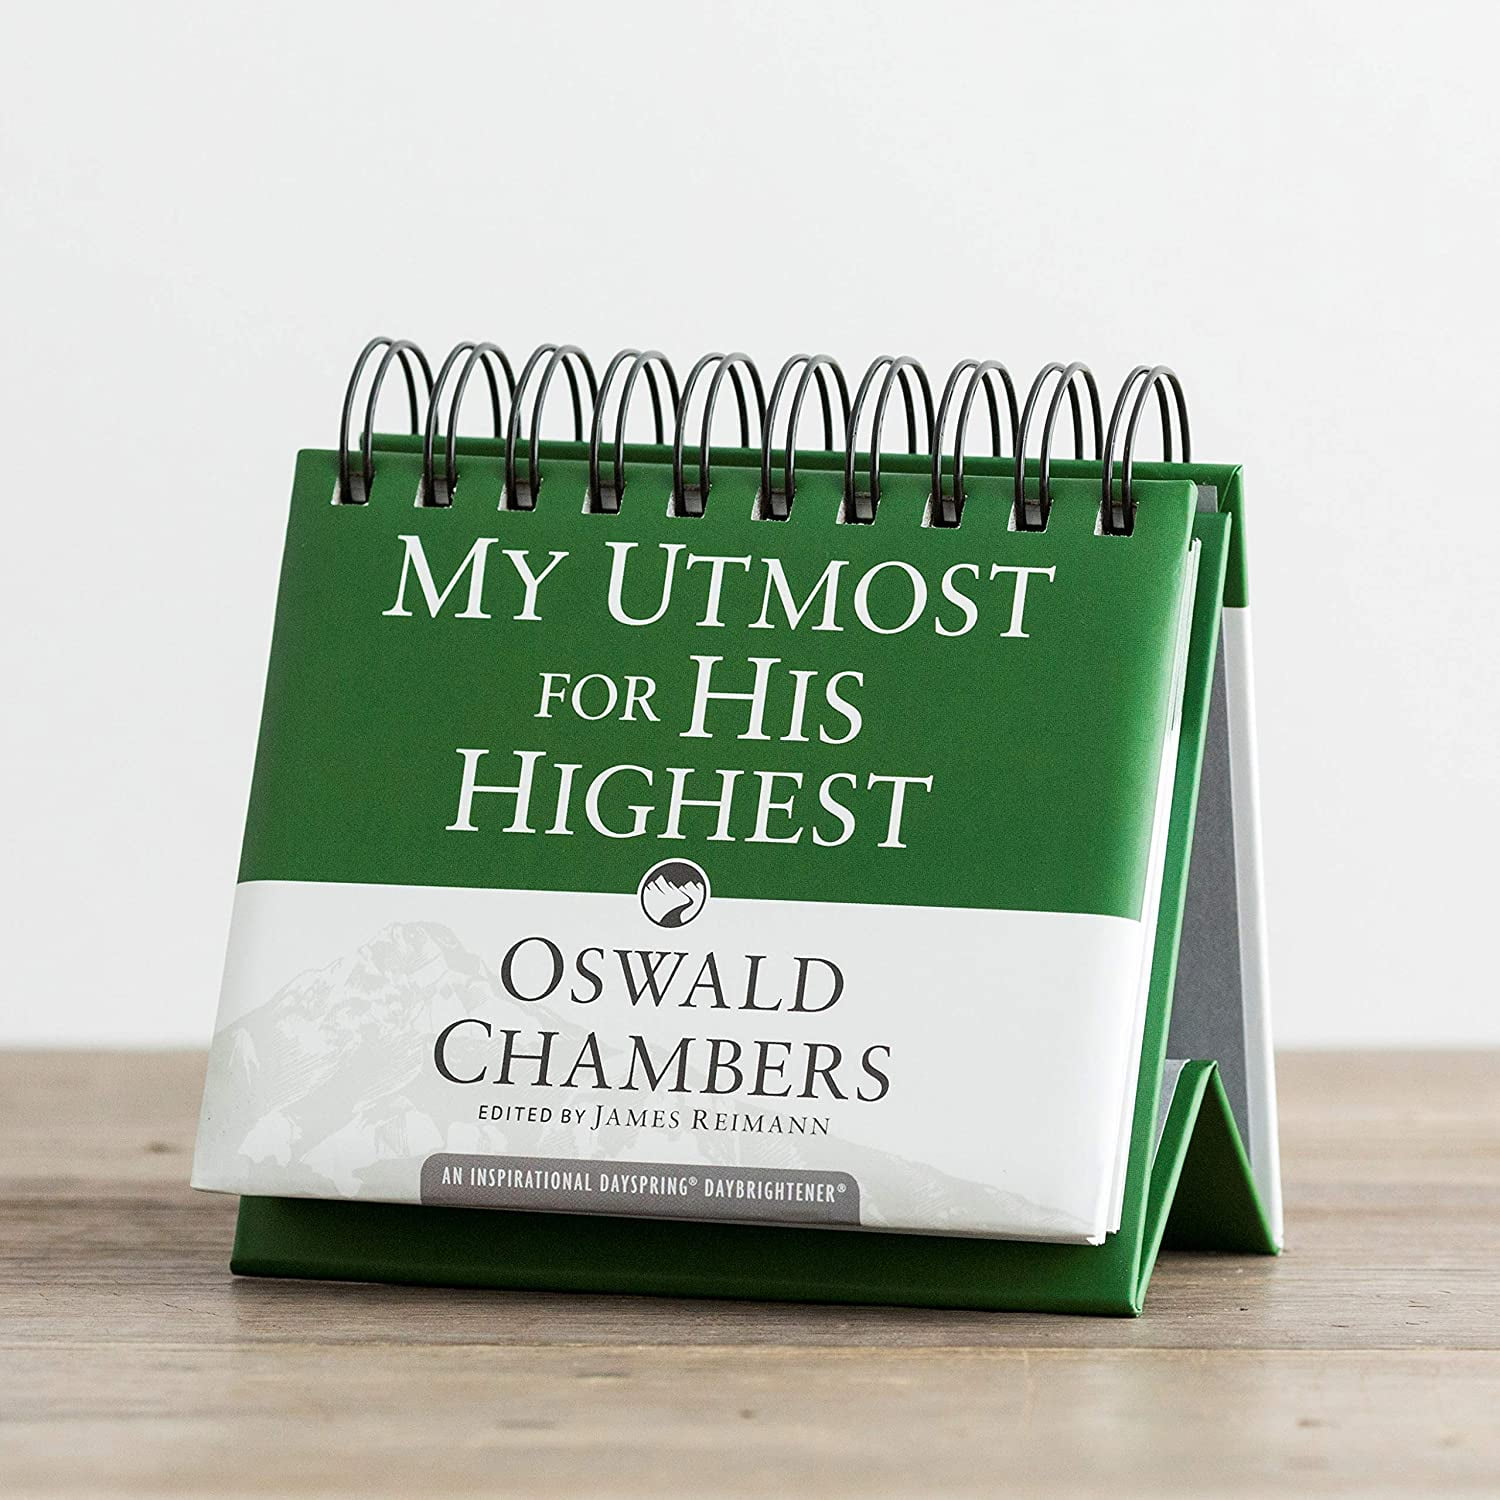 DaySpring 10179 Perpetual Calendar My Utmost for His Highest Oswald Chambers 